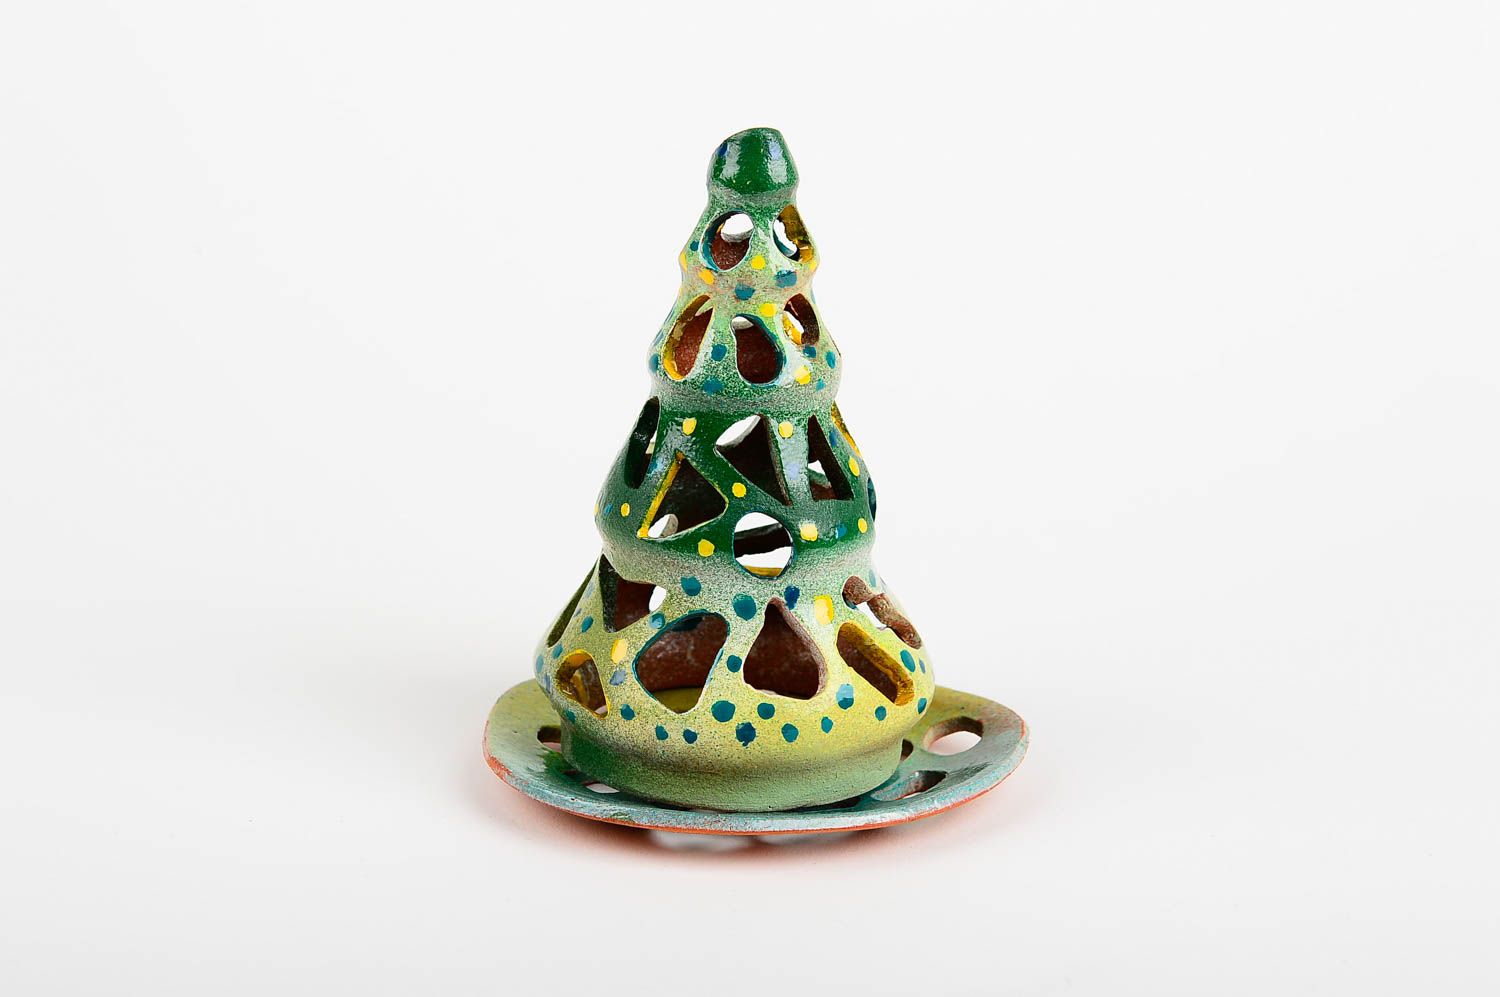 Tealight ceramic light-glow green Christmas tree plate candle holder 6,6 inches, 0,4 lb photo 1